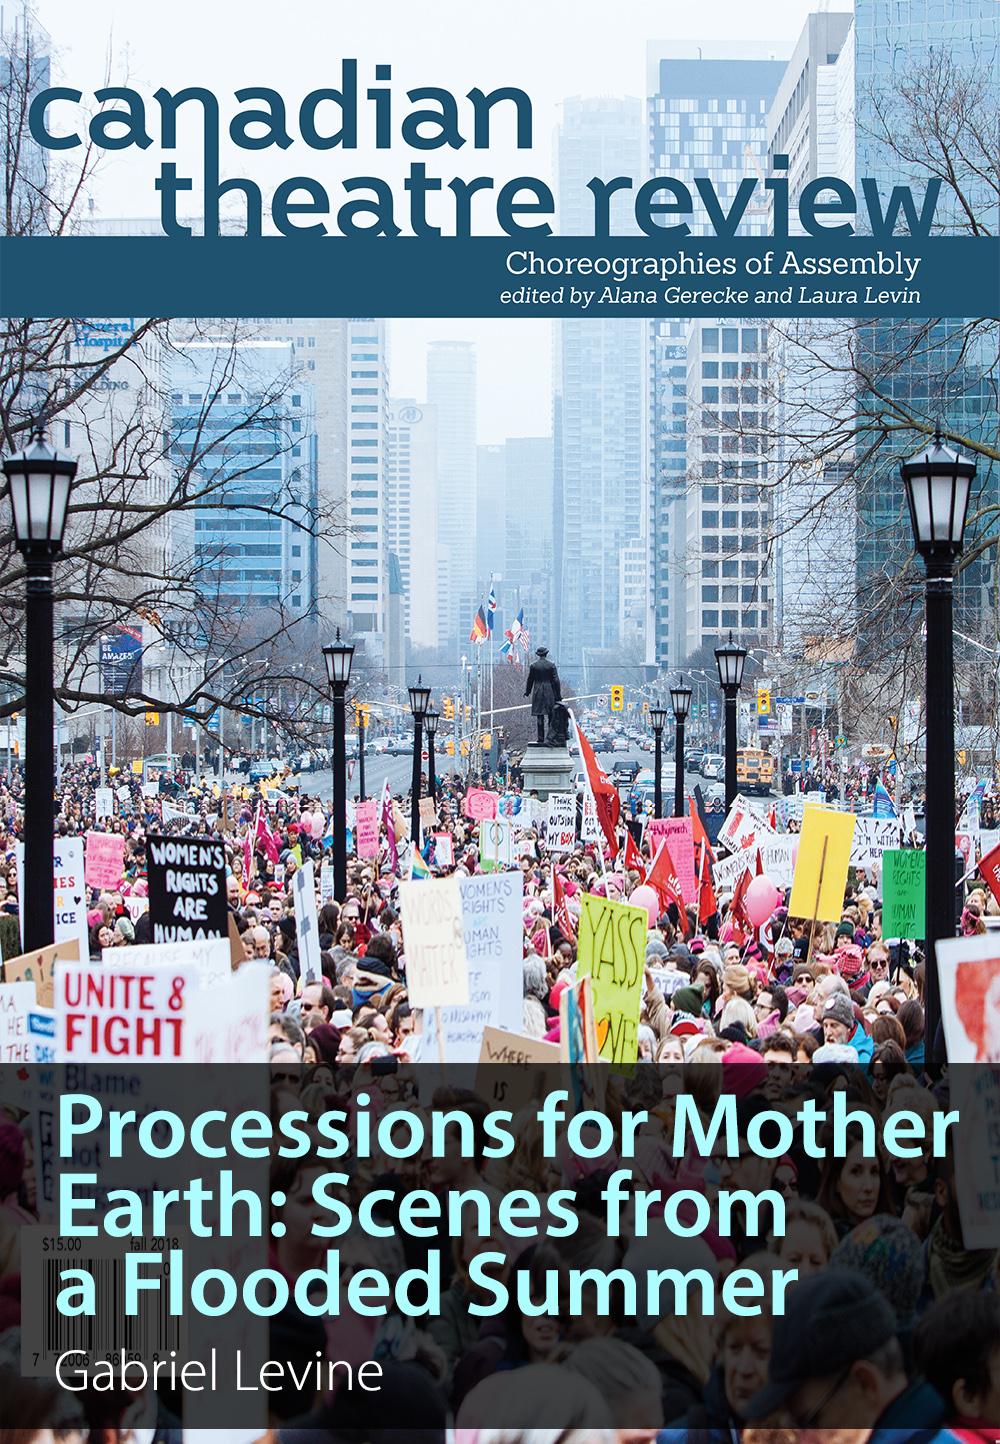 Processions for Mother Earth: Scenes from a Flooded Summer, Volume 176, 2018